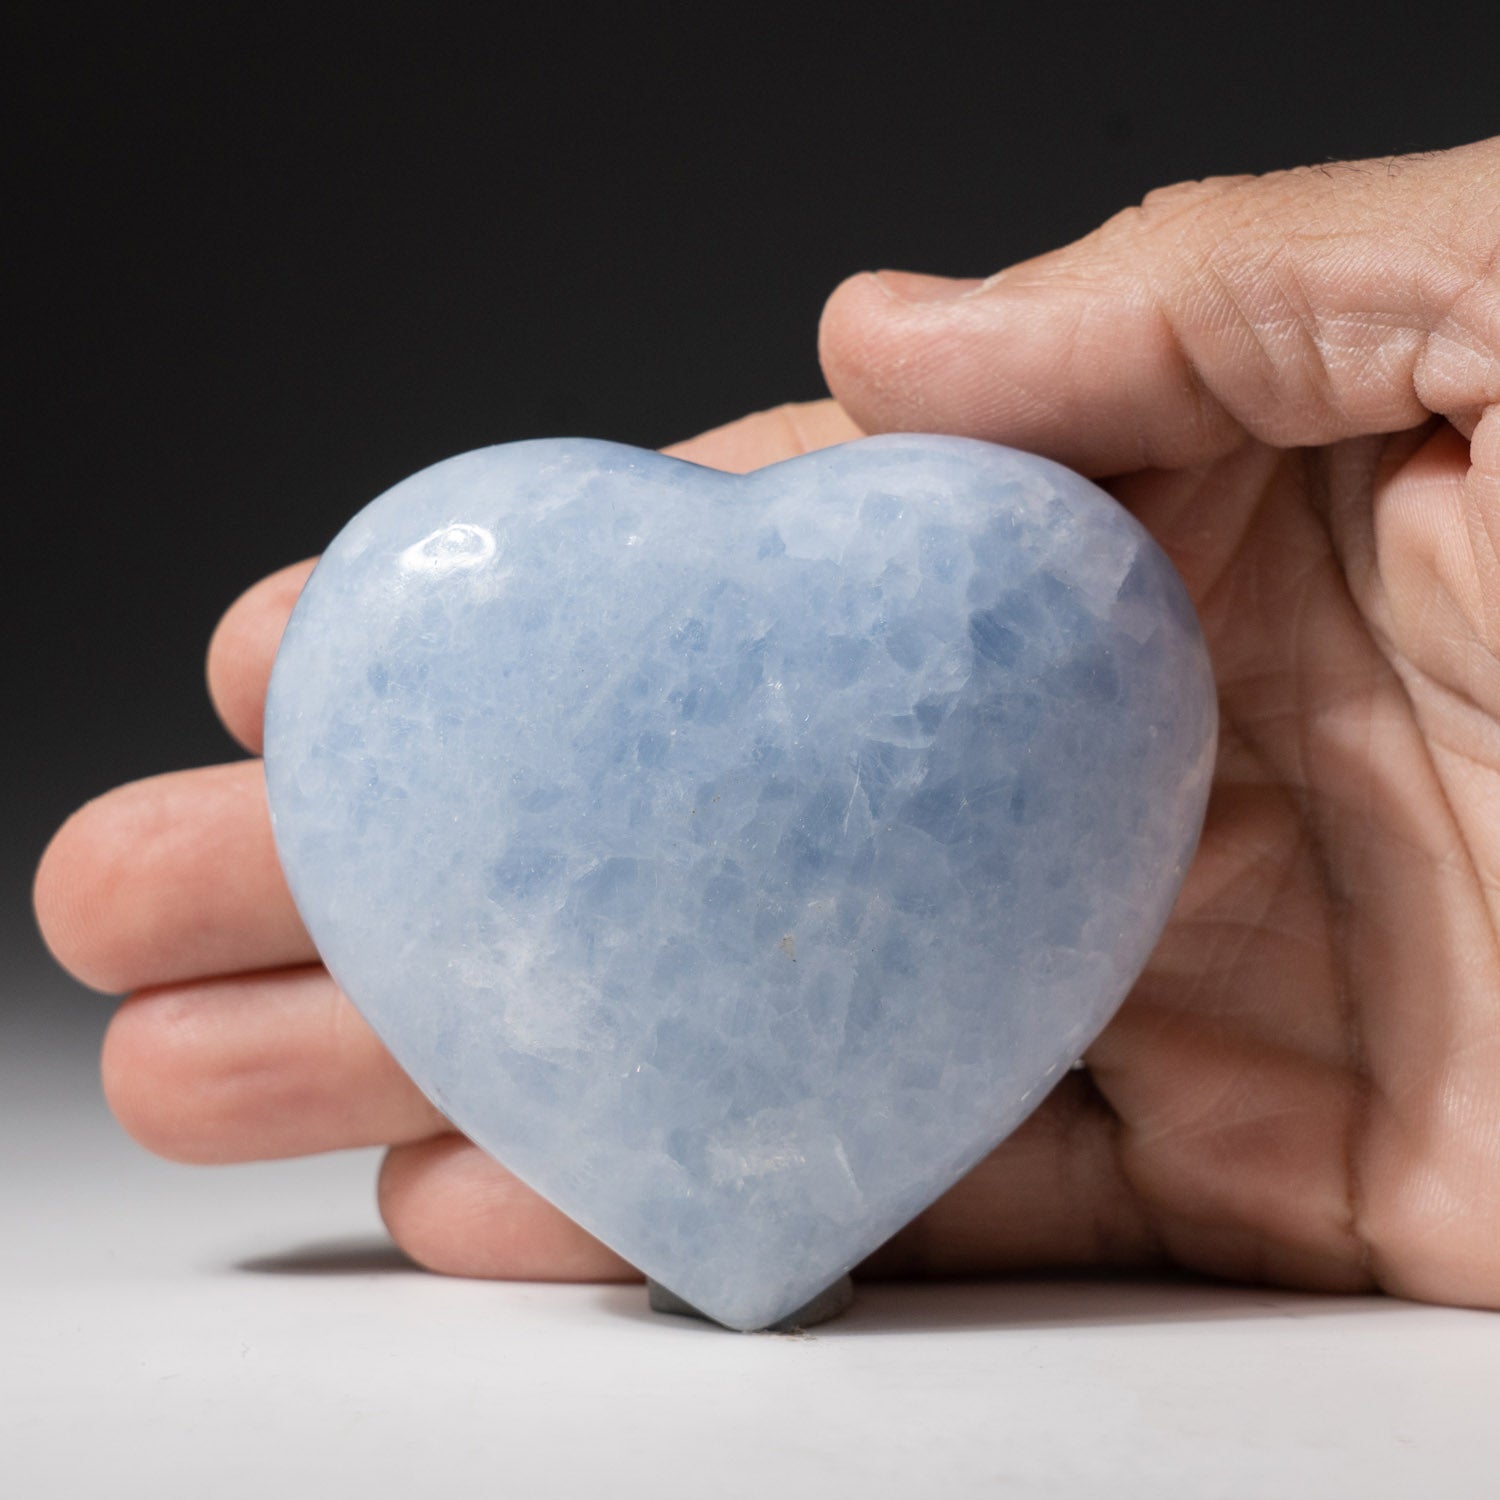 Genuine Polished Blue Calcite Heart from Mexico (1lb)